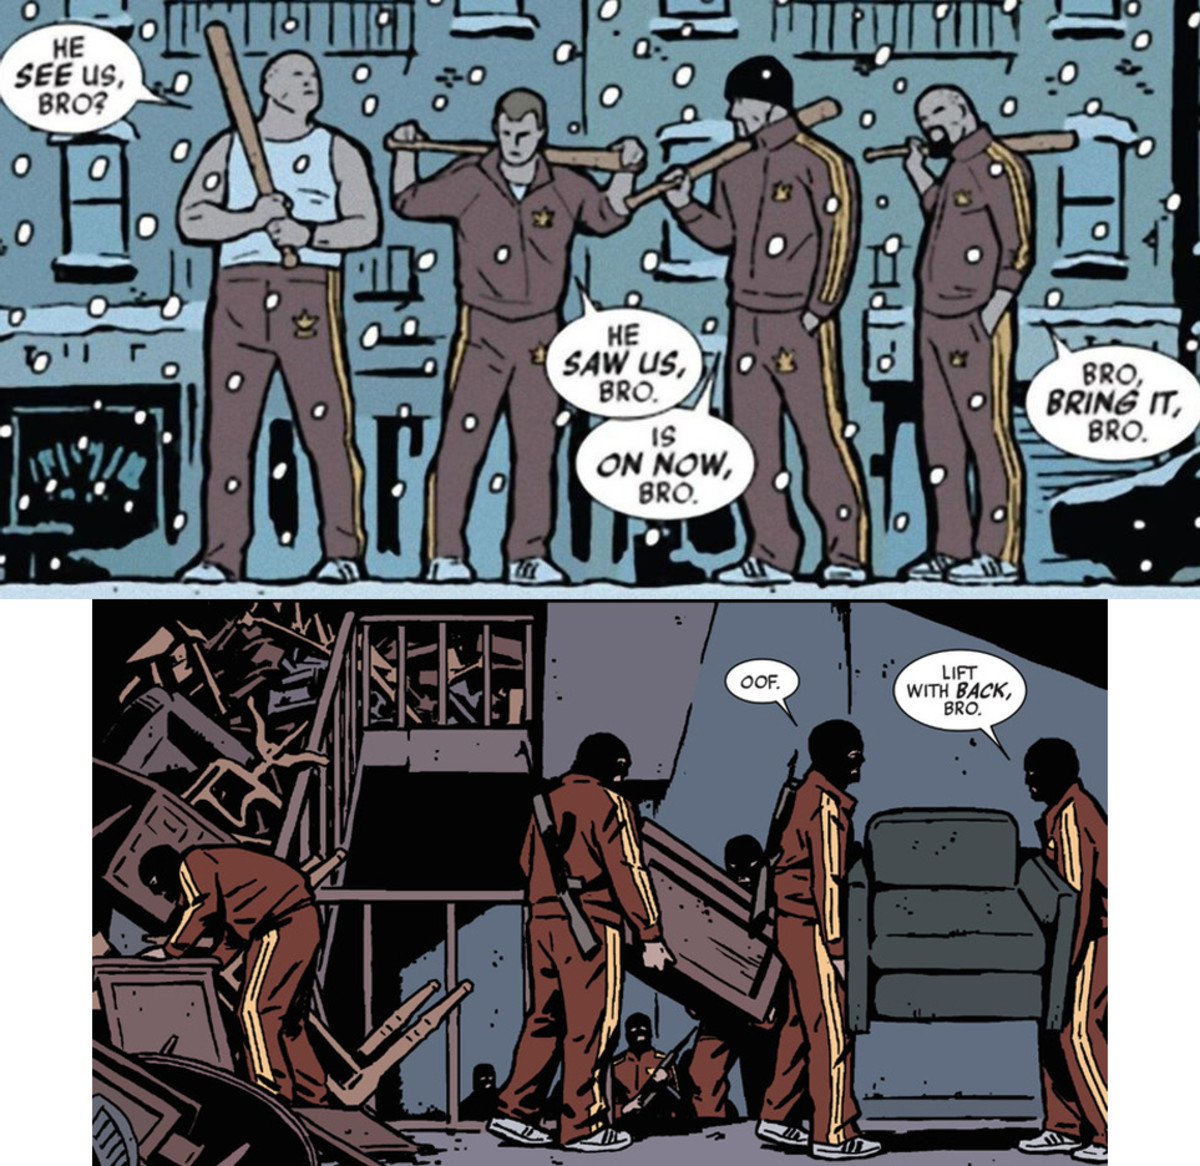 Tracksuit Mafia goons in the Hawkeye comic series beginning in 2012 by Matt Fraction and David AjaA.